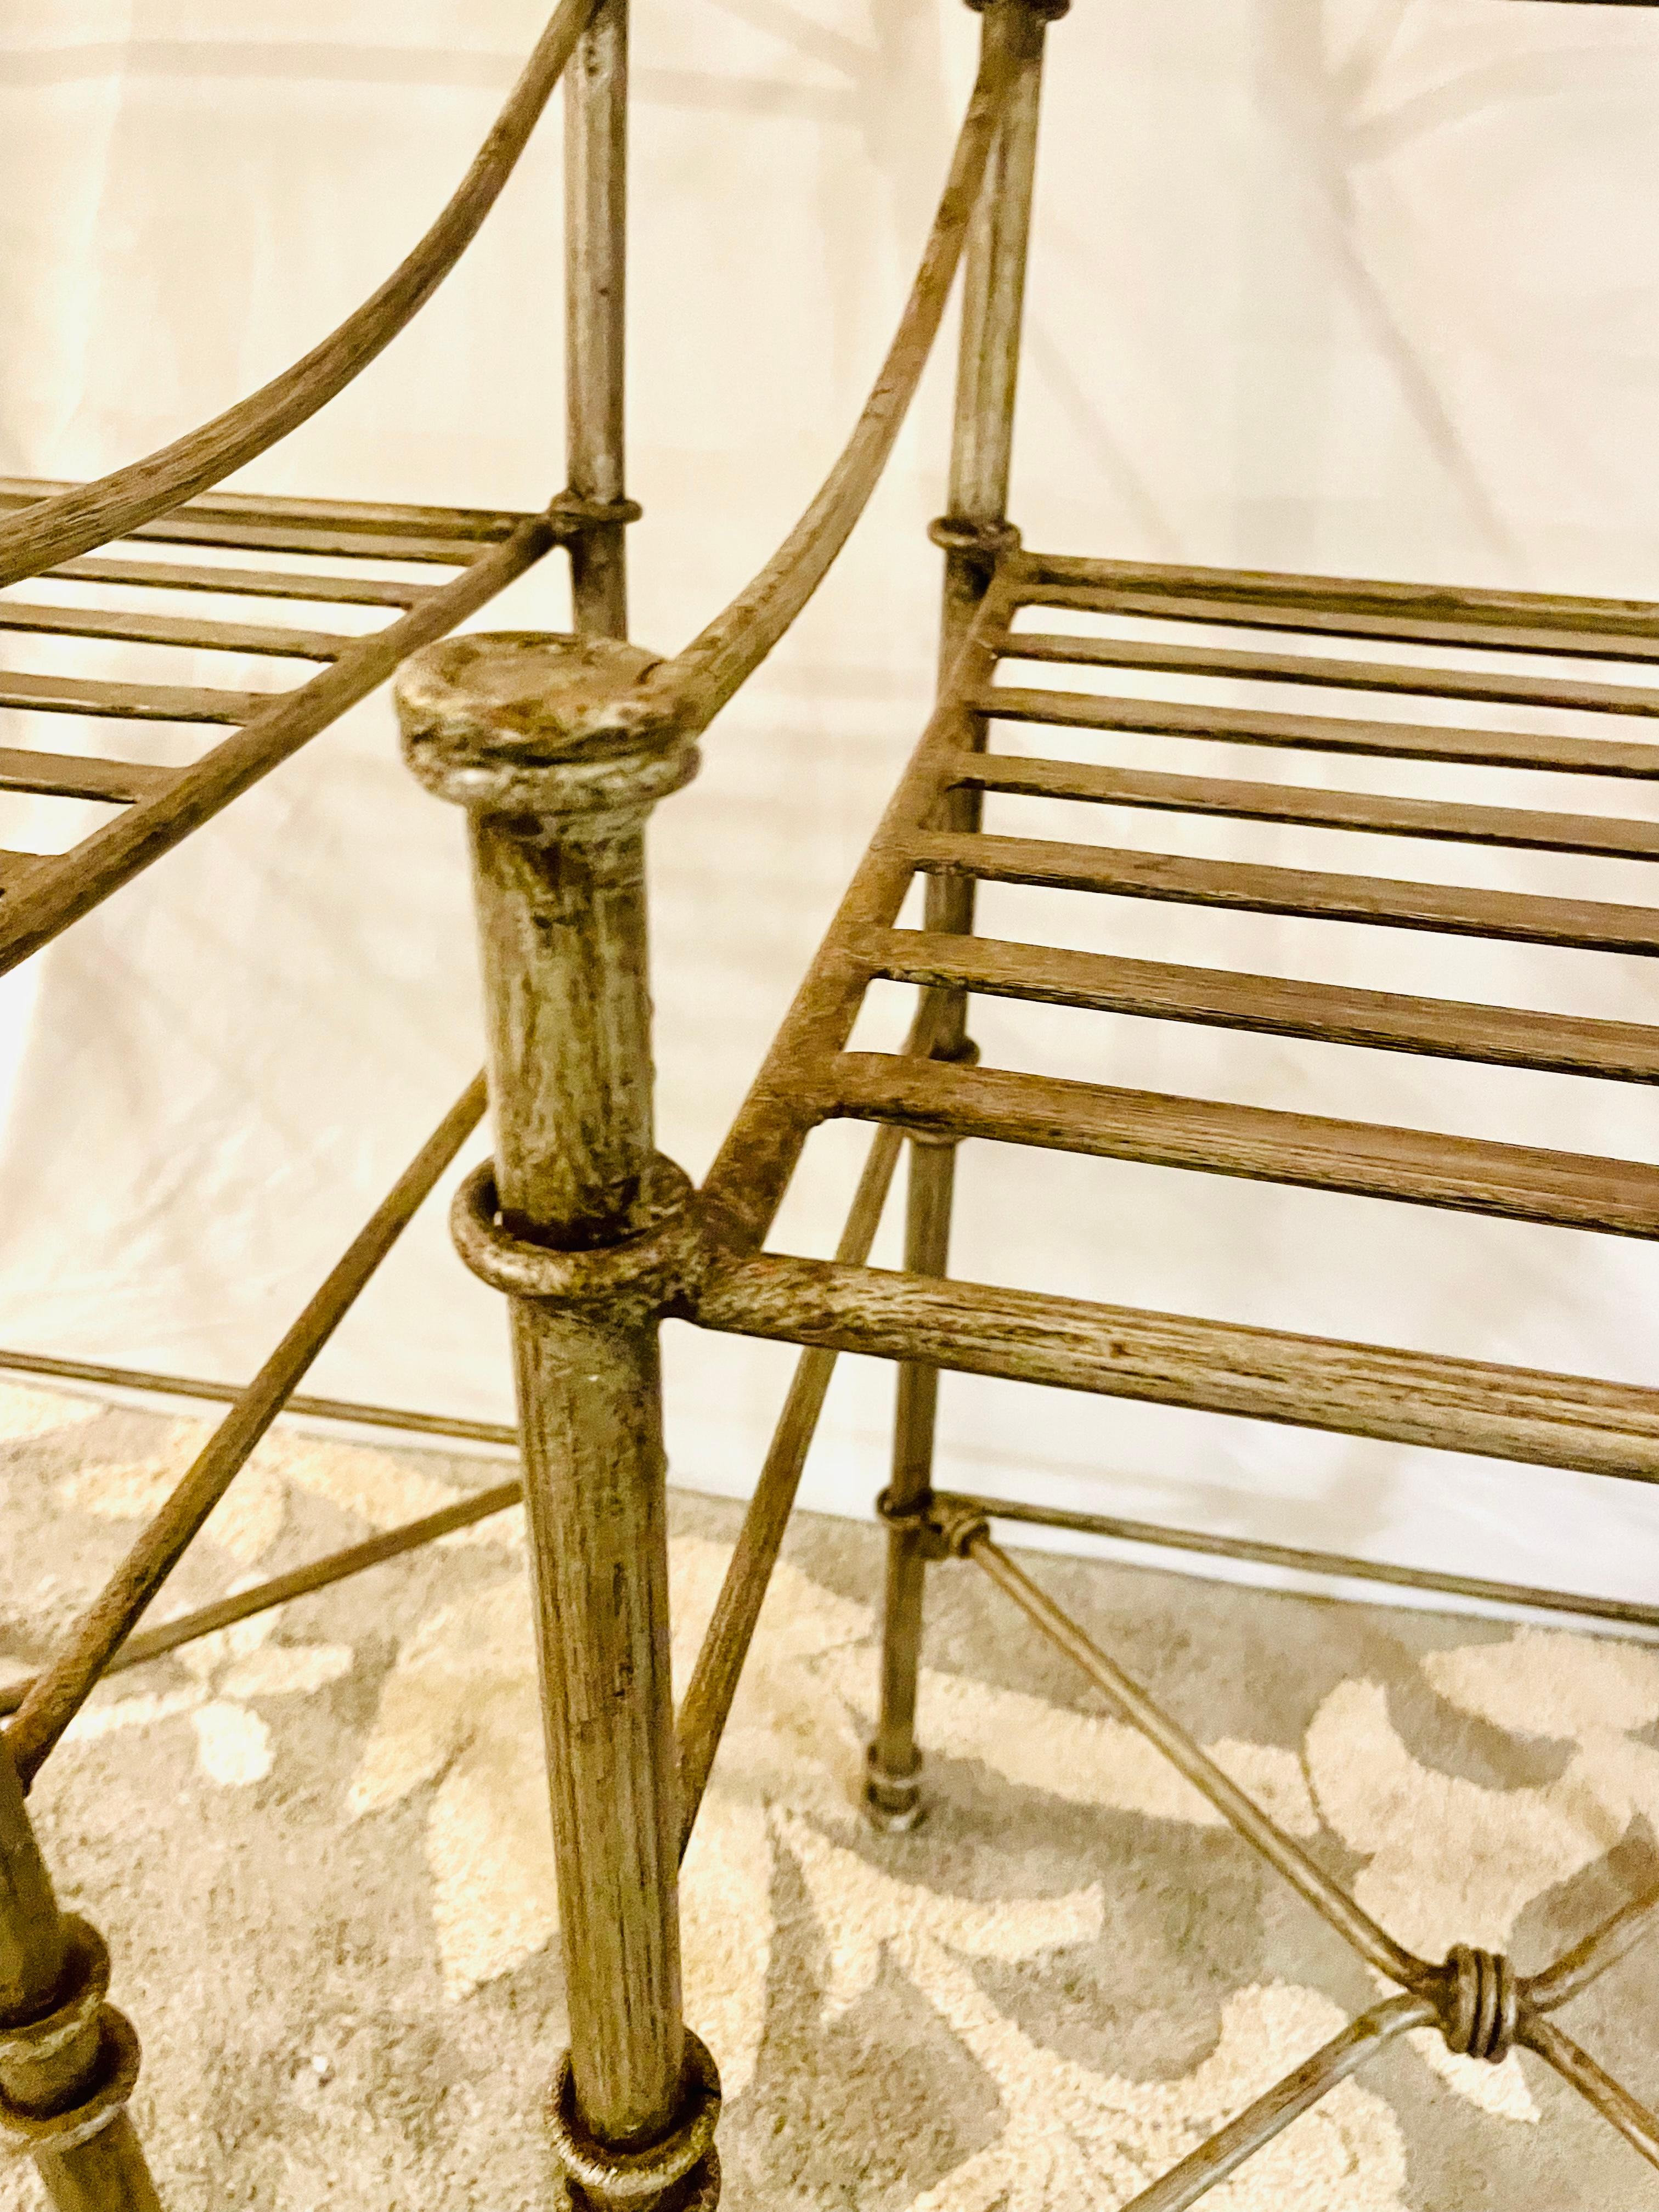 Giacometti Inspired Wrought Iron Chairs A Set of Bar Stool Dining Chairs In Good Condition For Sale In Cumberland, RI